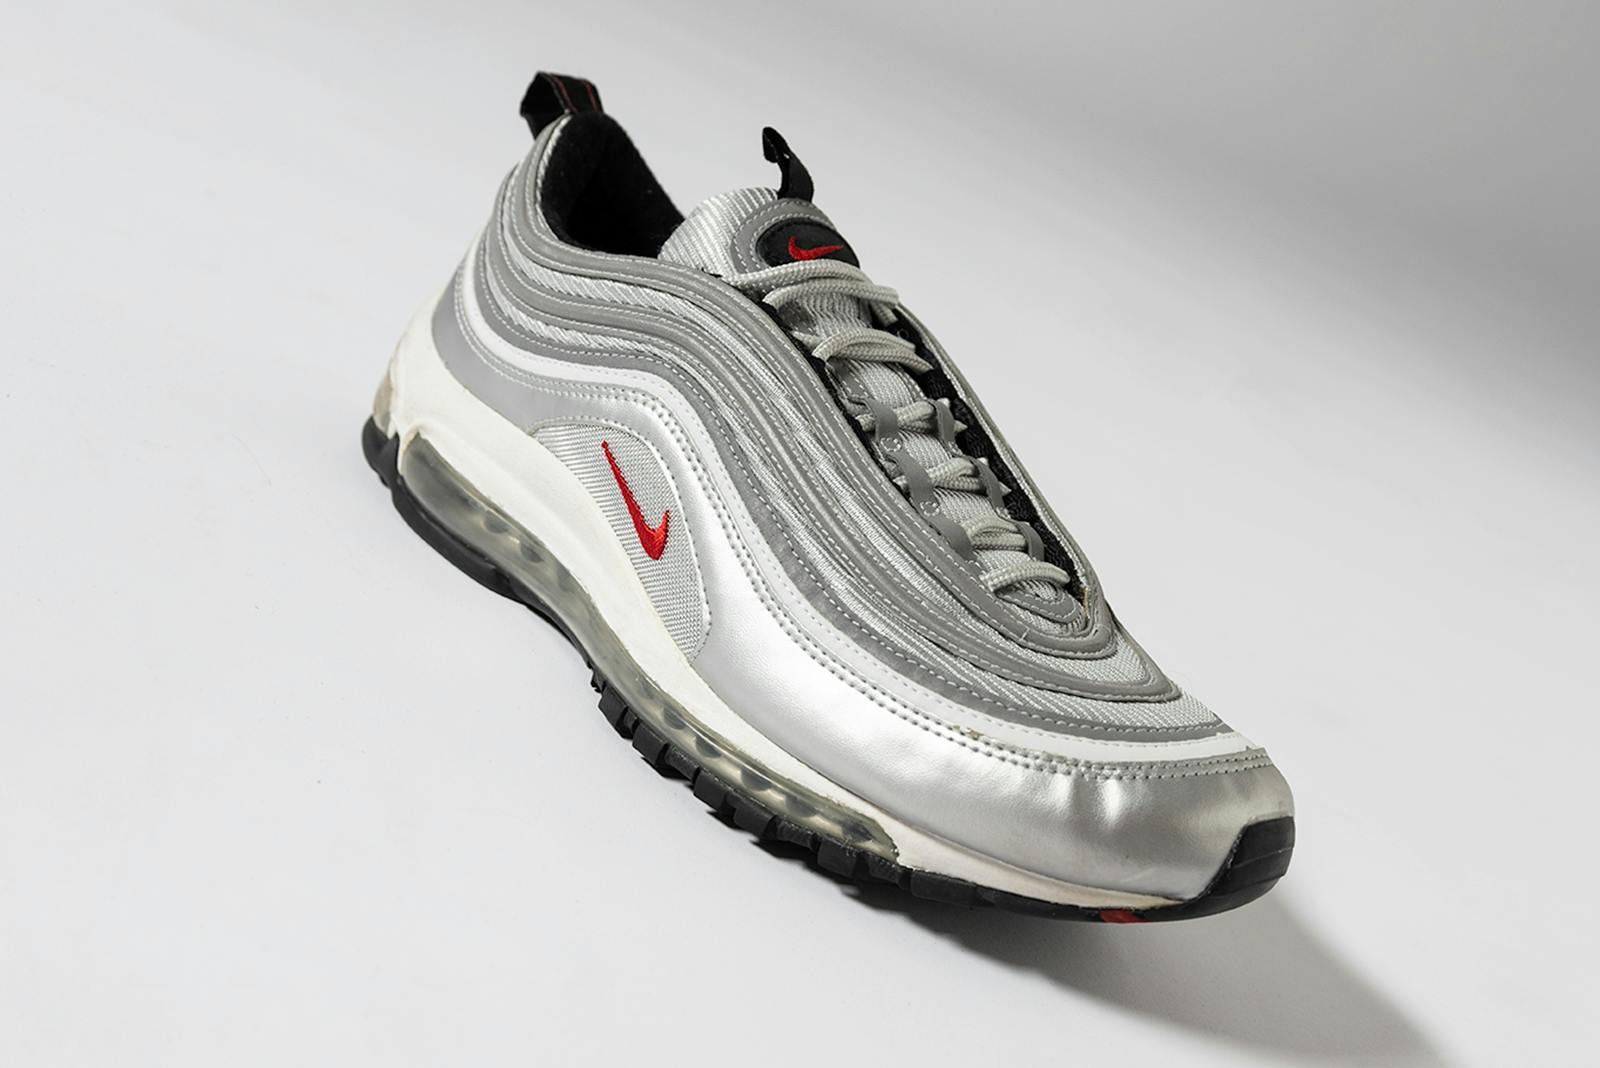 PROGRESSIVE PERMANENCE: The Story of Nike's Air Max 97 “Silver